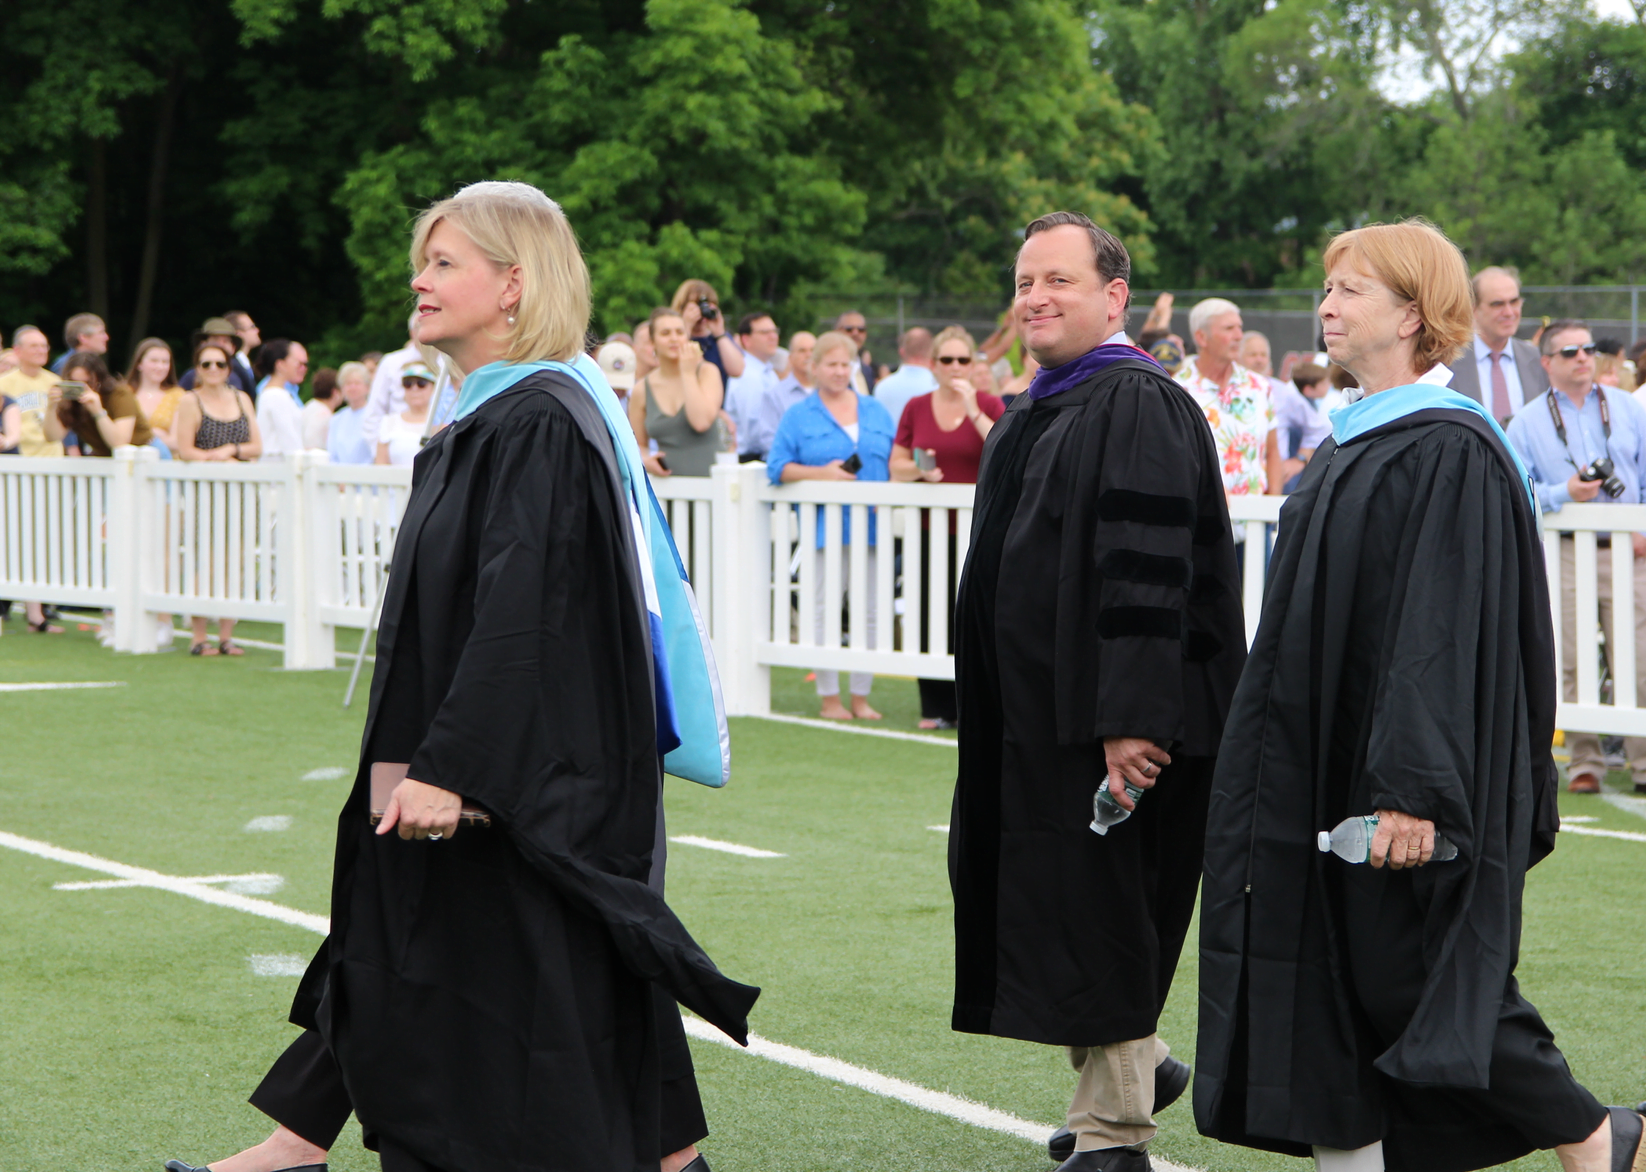 Peter Bernstein and Mary Ford arrive at Cardinal Stadium for graduation. June 17, 2019 Photo: Leslie Yager